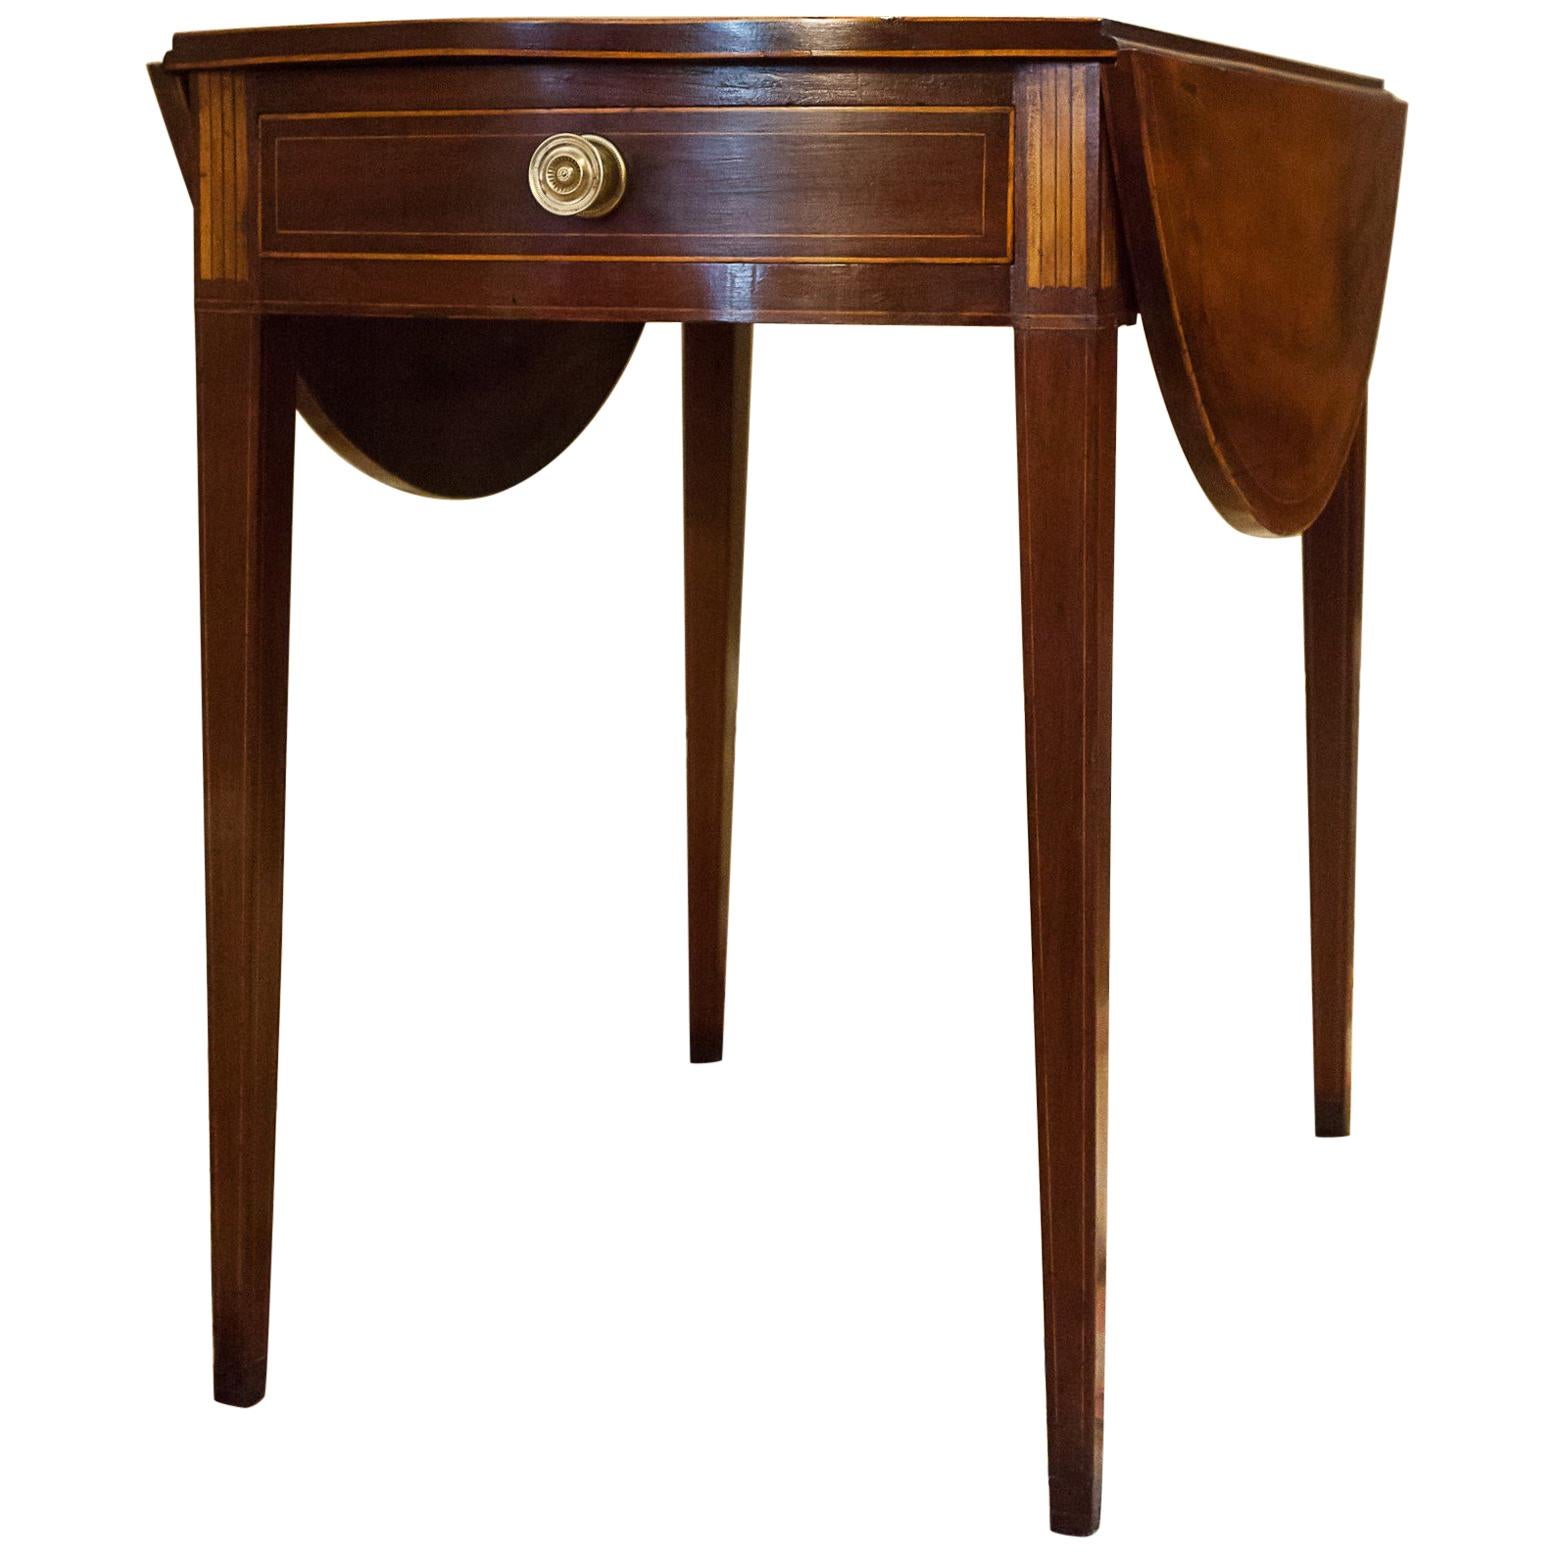 Federal Satinwood Inlaid Mahogany Oval Pembroke Table, New York, circa 1800 For Sale